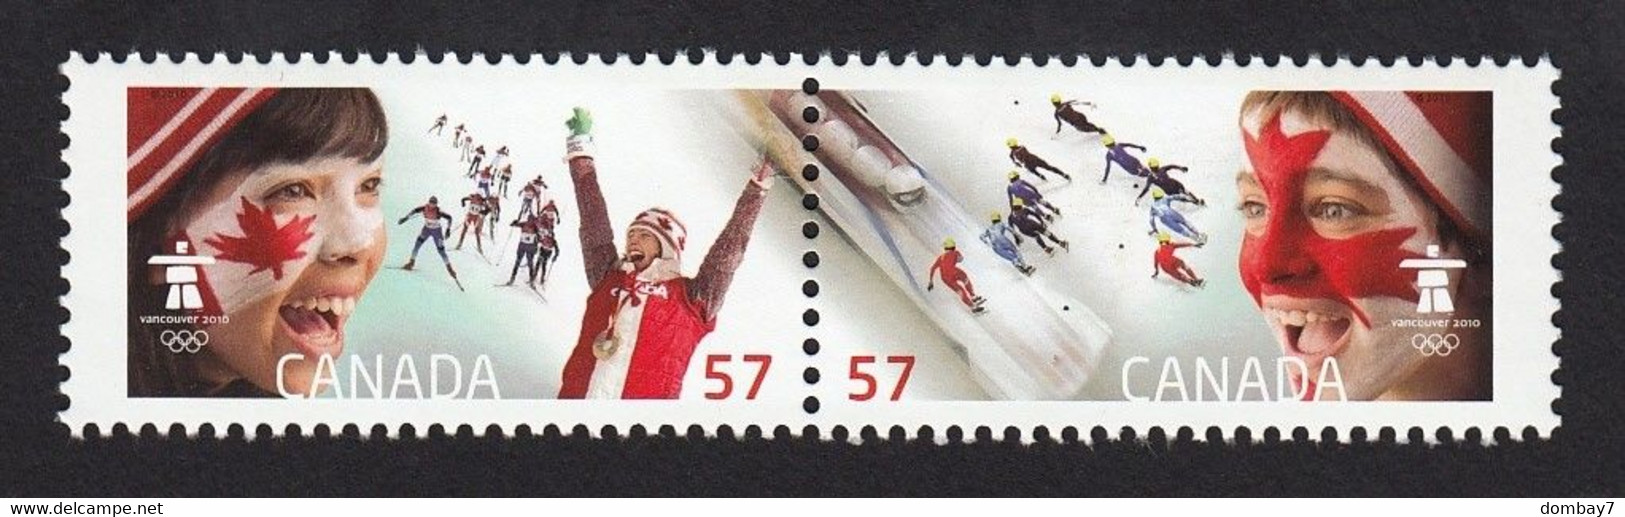 Qt. VANCOUVER OLYMPIC WINTER GAMES = CROSS-COUNTRY SKIING, BOBSLEIGH = Pair From Souvenir Sheet MNH Canada 2010 #2373a,b - Hiver 2010: Vancouver